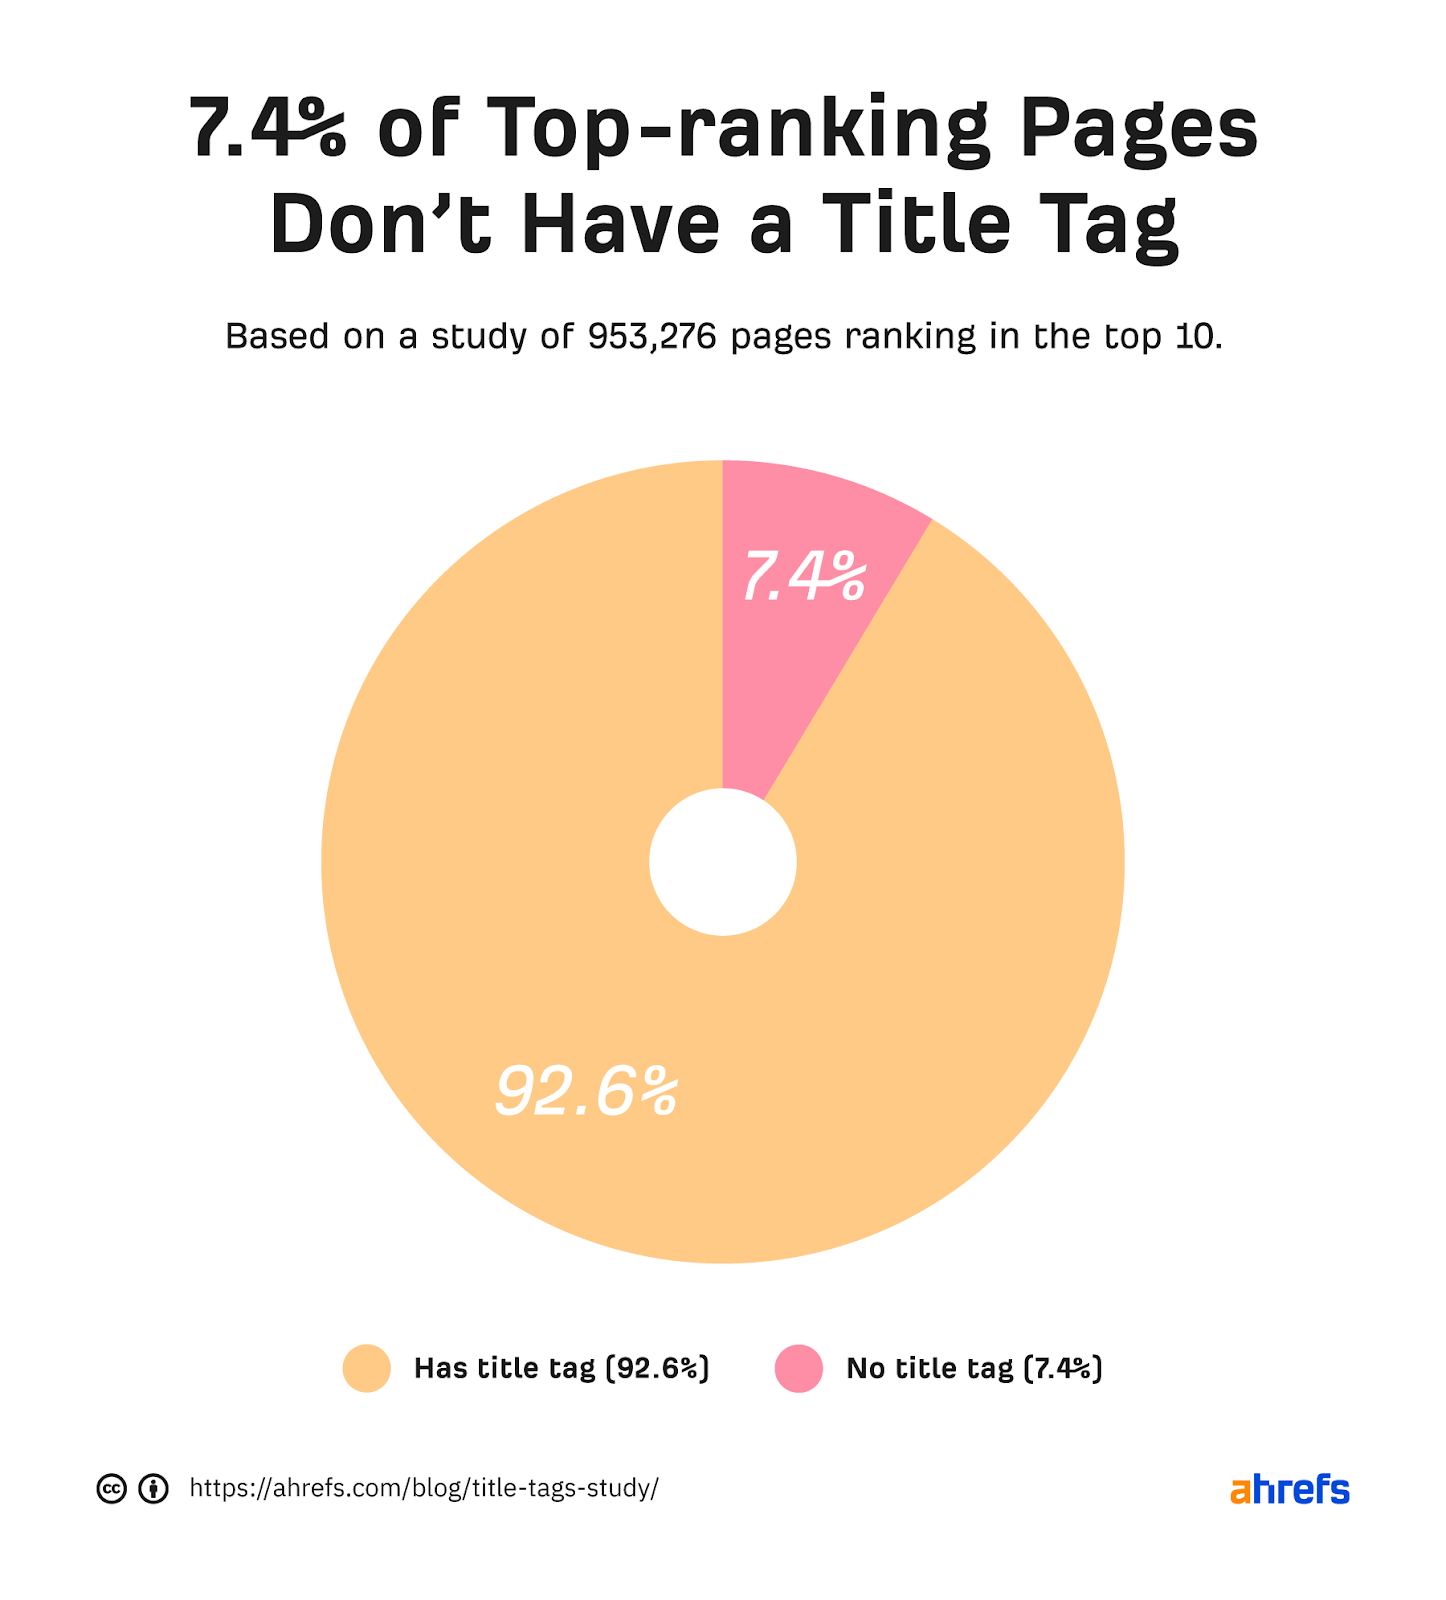 7.4% of the top ranking pages do not have a title tag